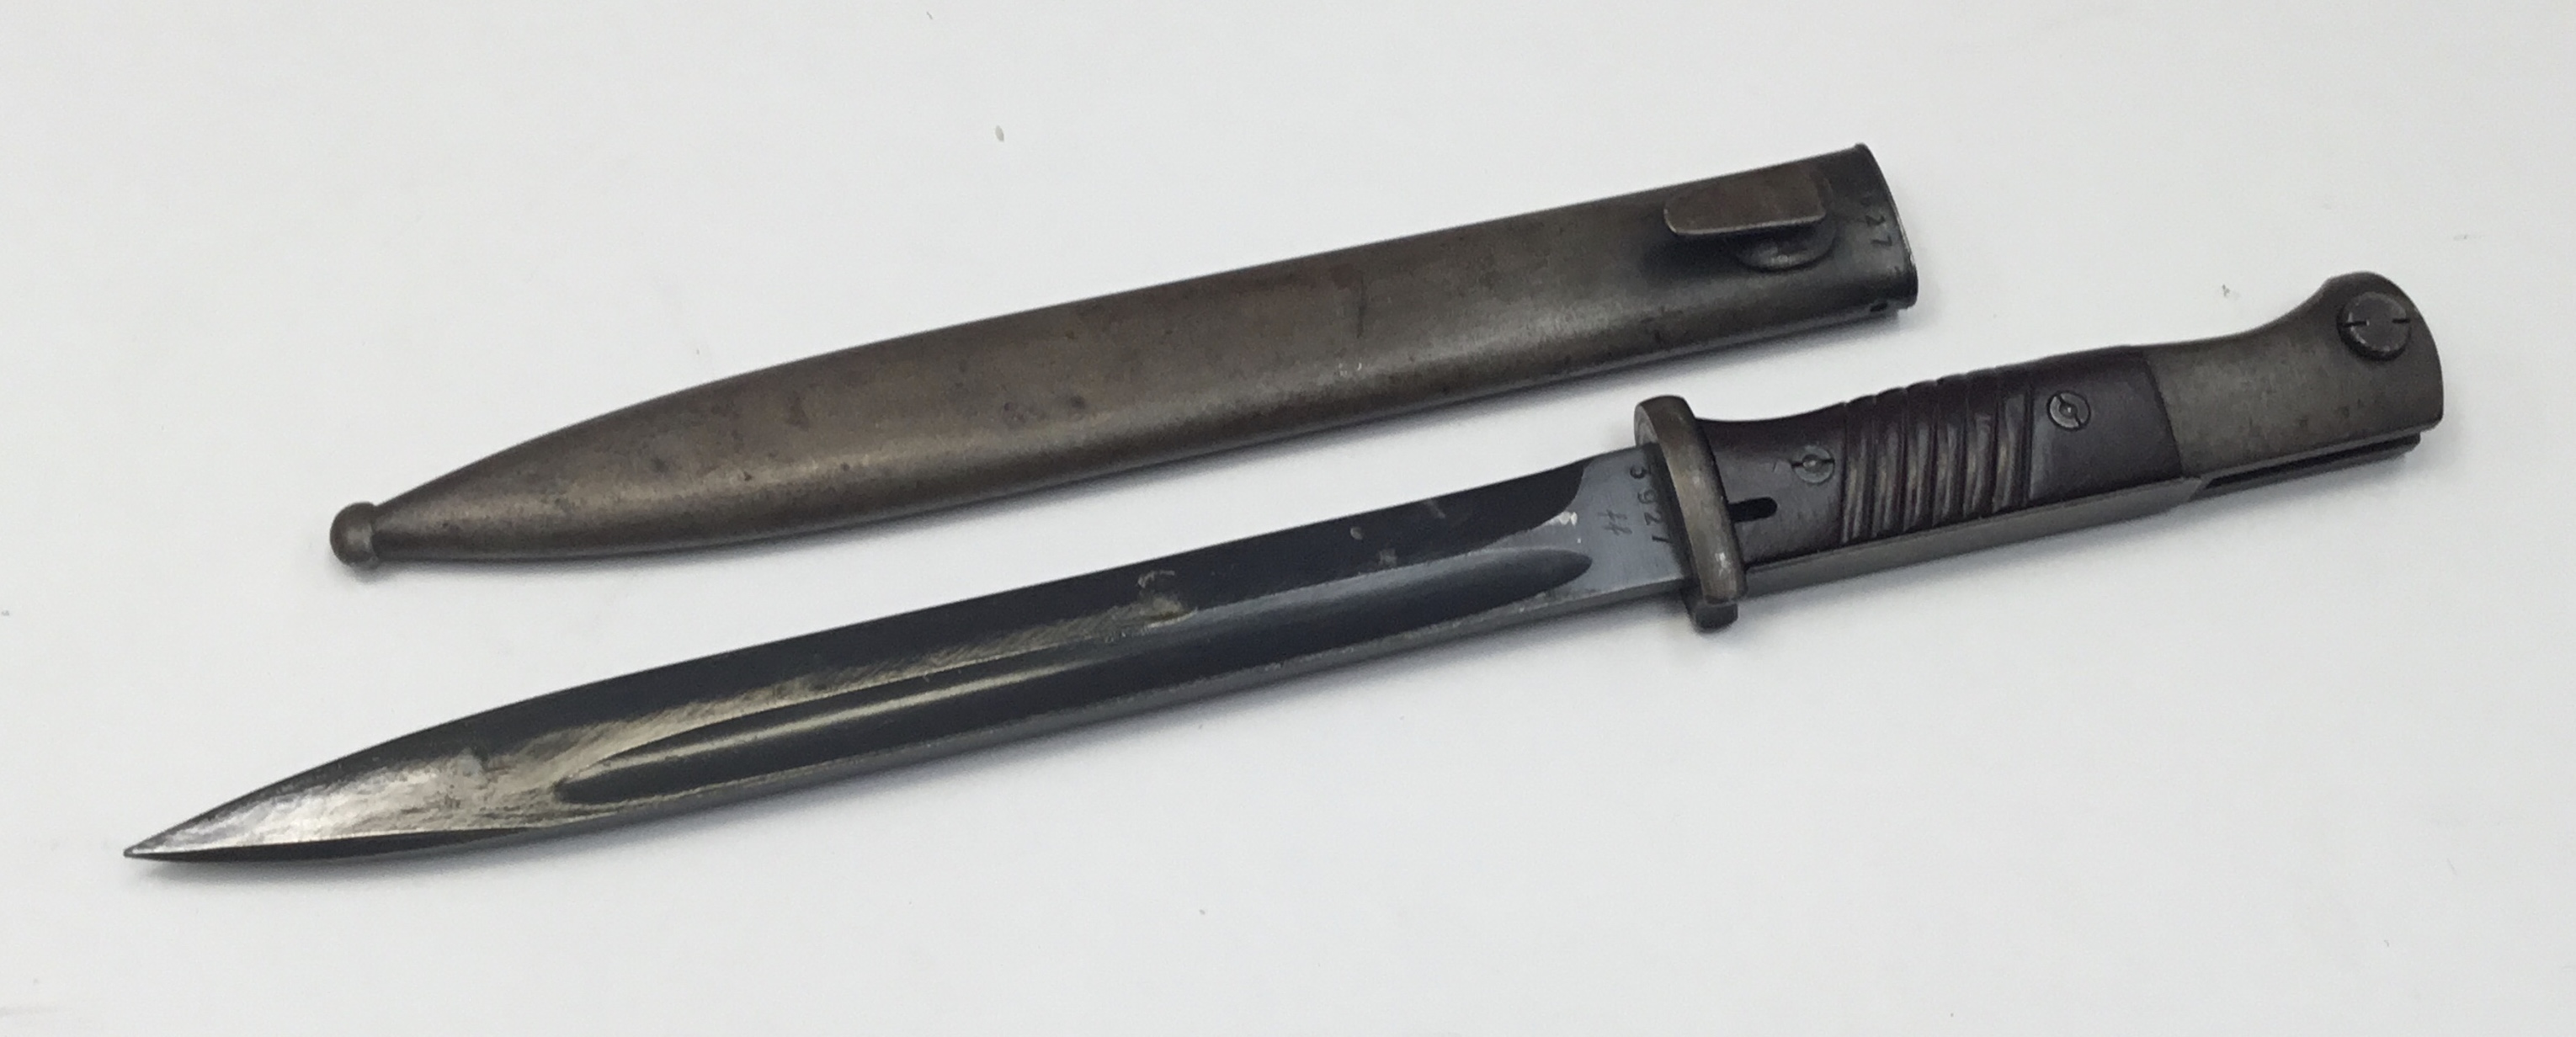 WW2 1943 dated K98 bayonet, with matched numbers to bayonet and scabbard. Of standard form, with